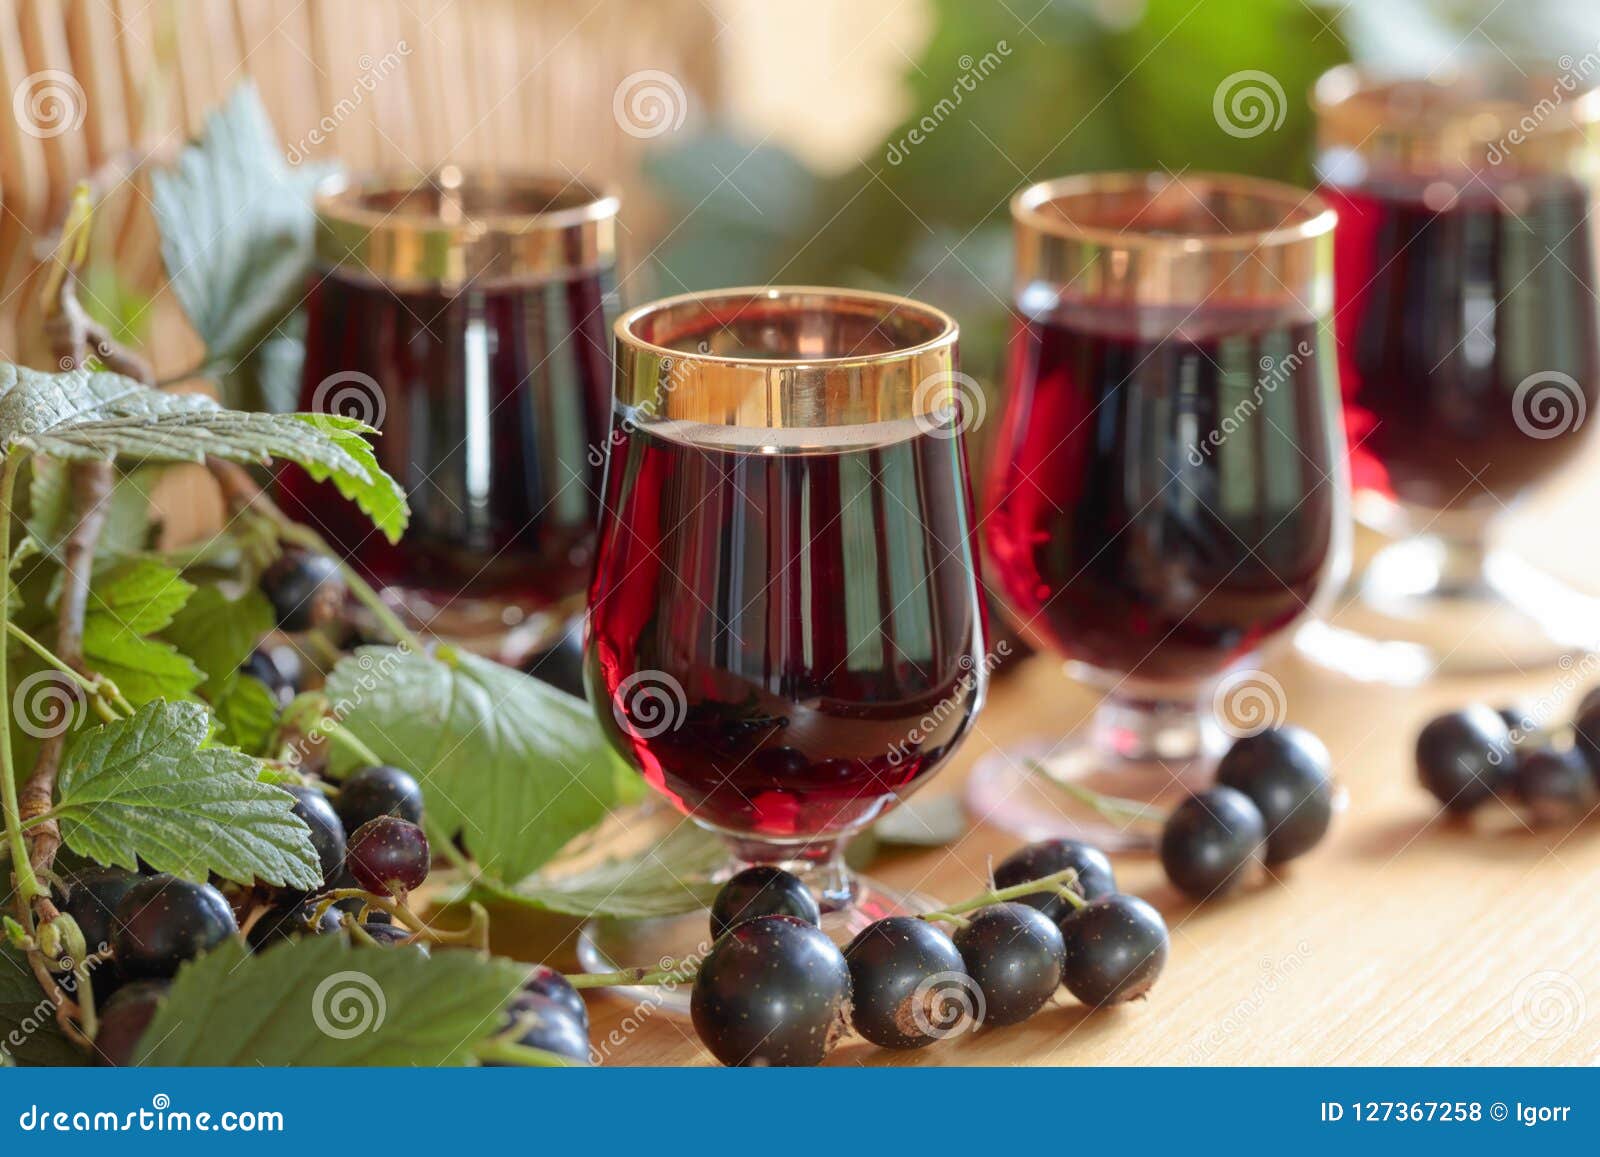 Homemade Black Currant Liqueur and Fresh Berries. Stock Photo - Image ...